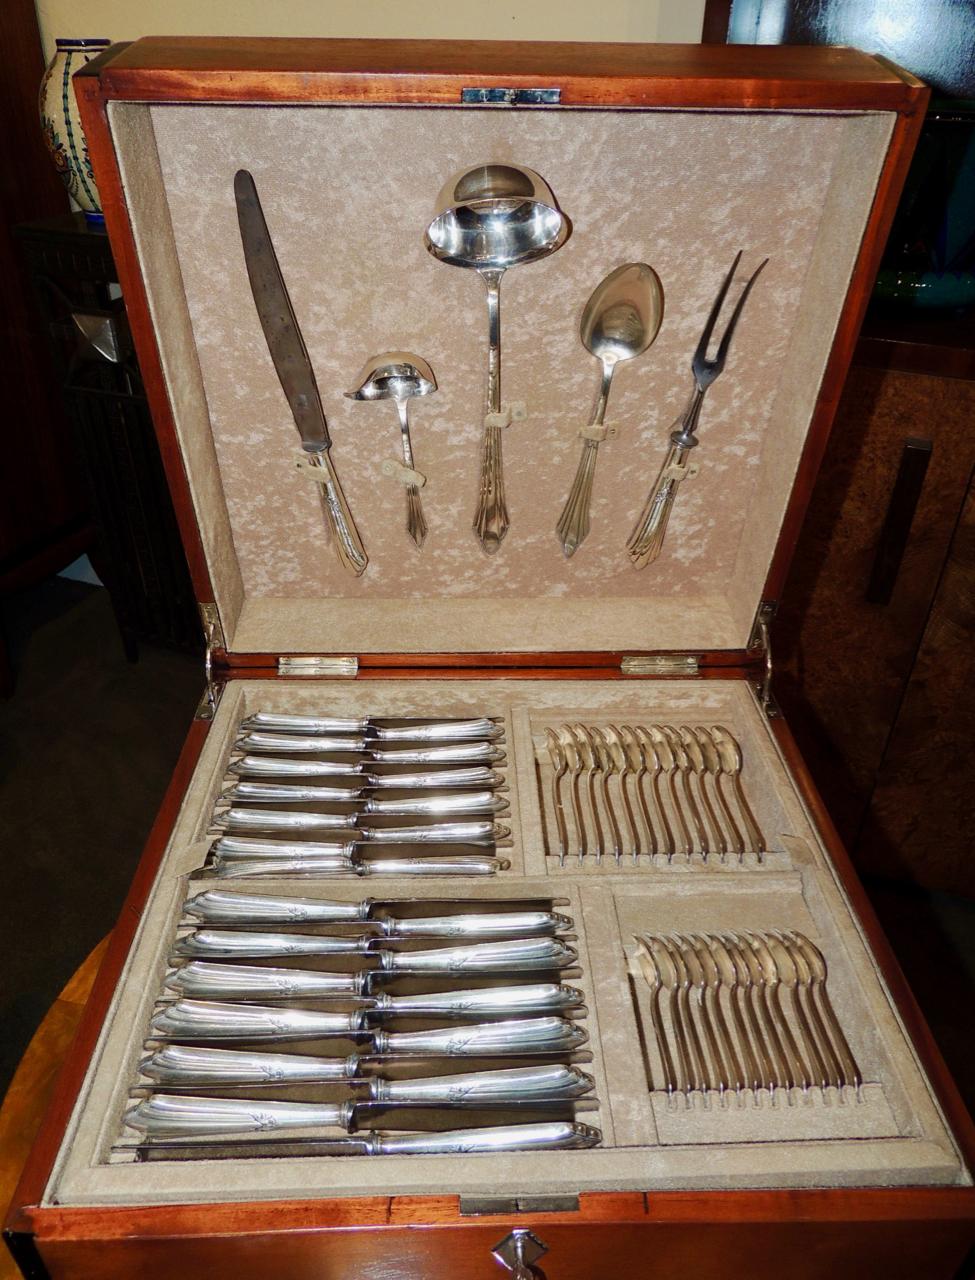 Complete set of Art Deco Silverware by WMF company nestled in a beautifully inlaid wooden box. Beginning with your first look at the unusual design of a leaping gazelle perfectly inlaid in the center of the mahogany “cubiertero” (silverware storage